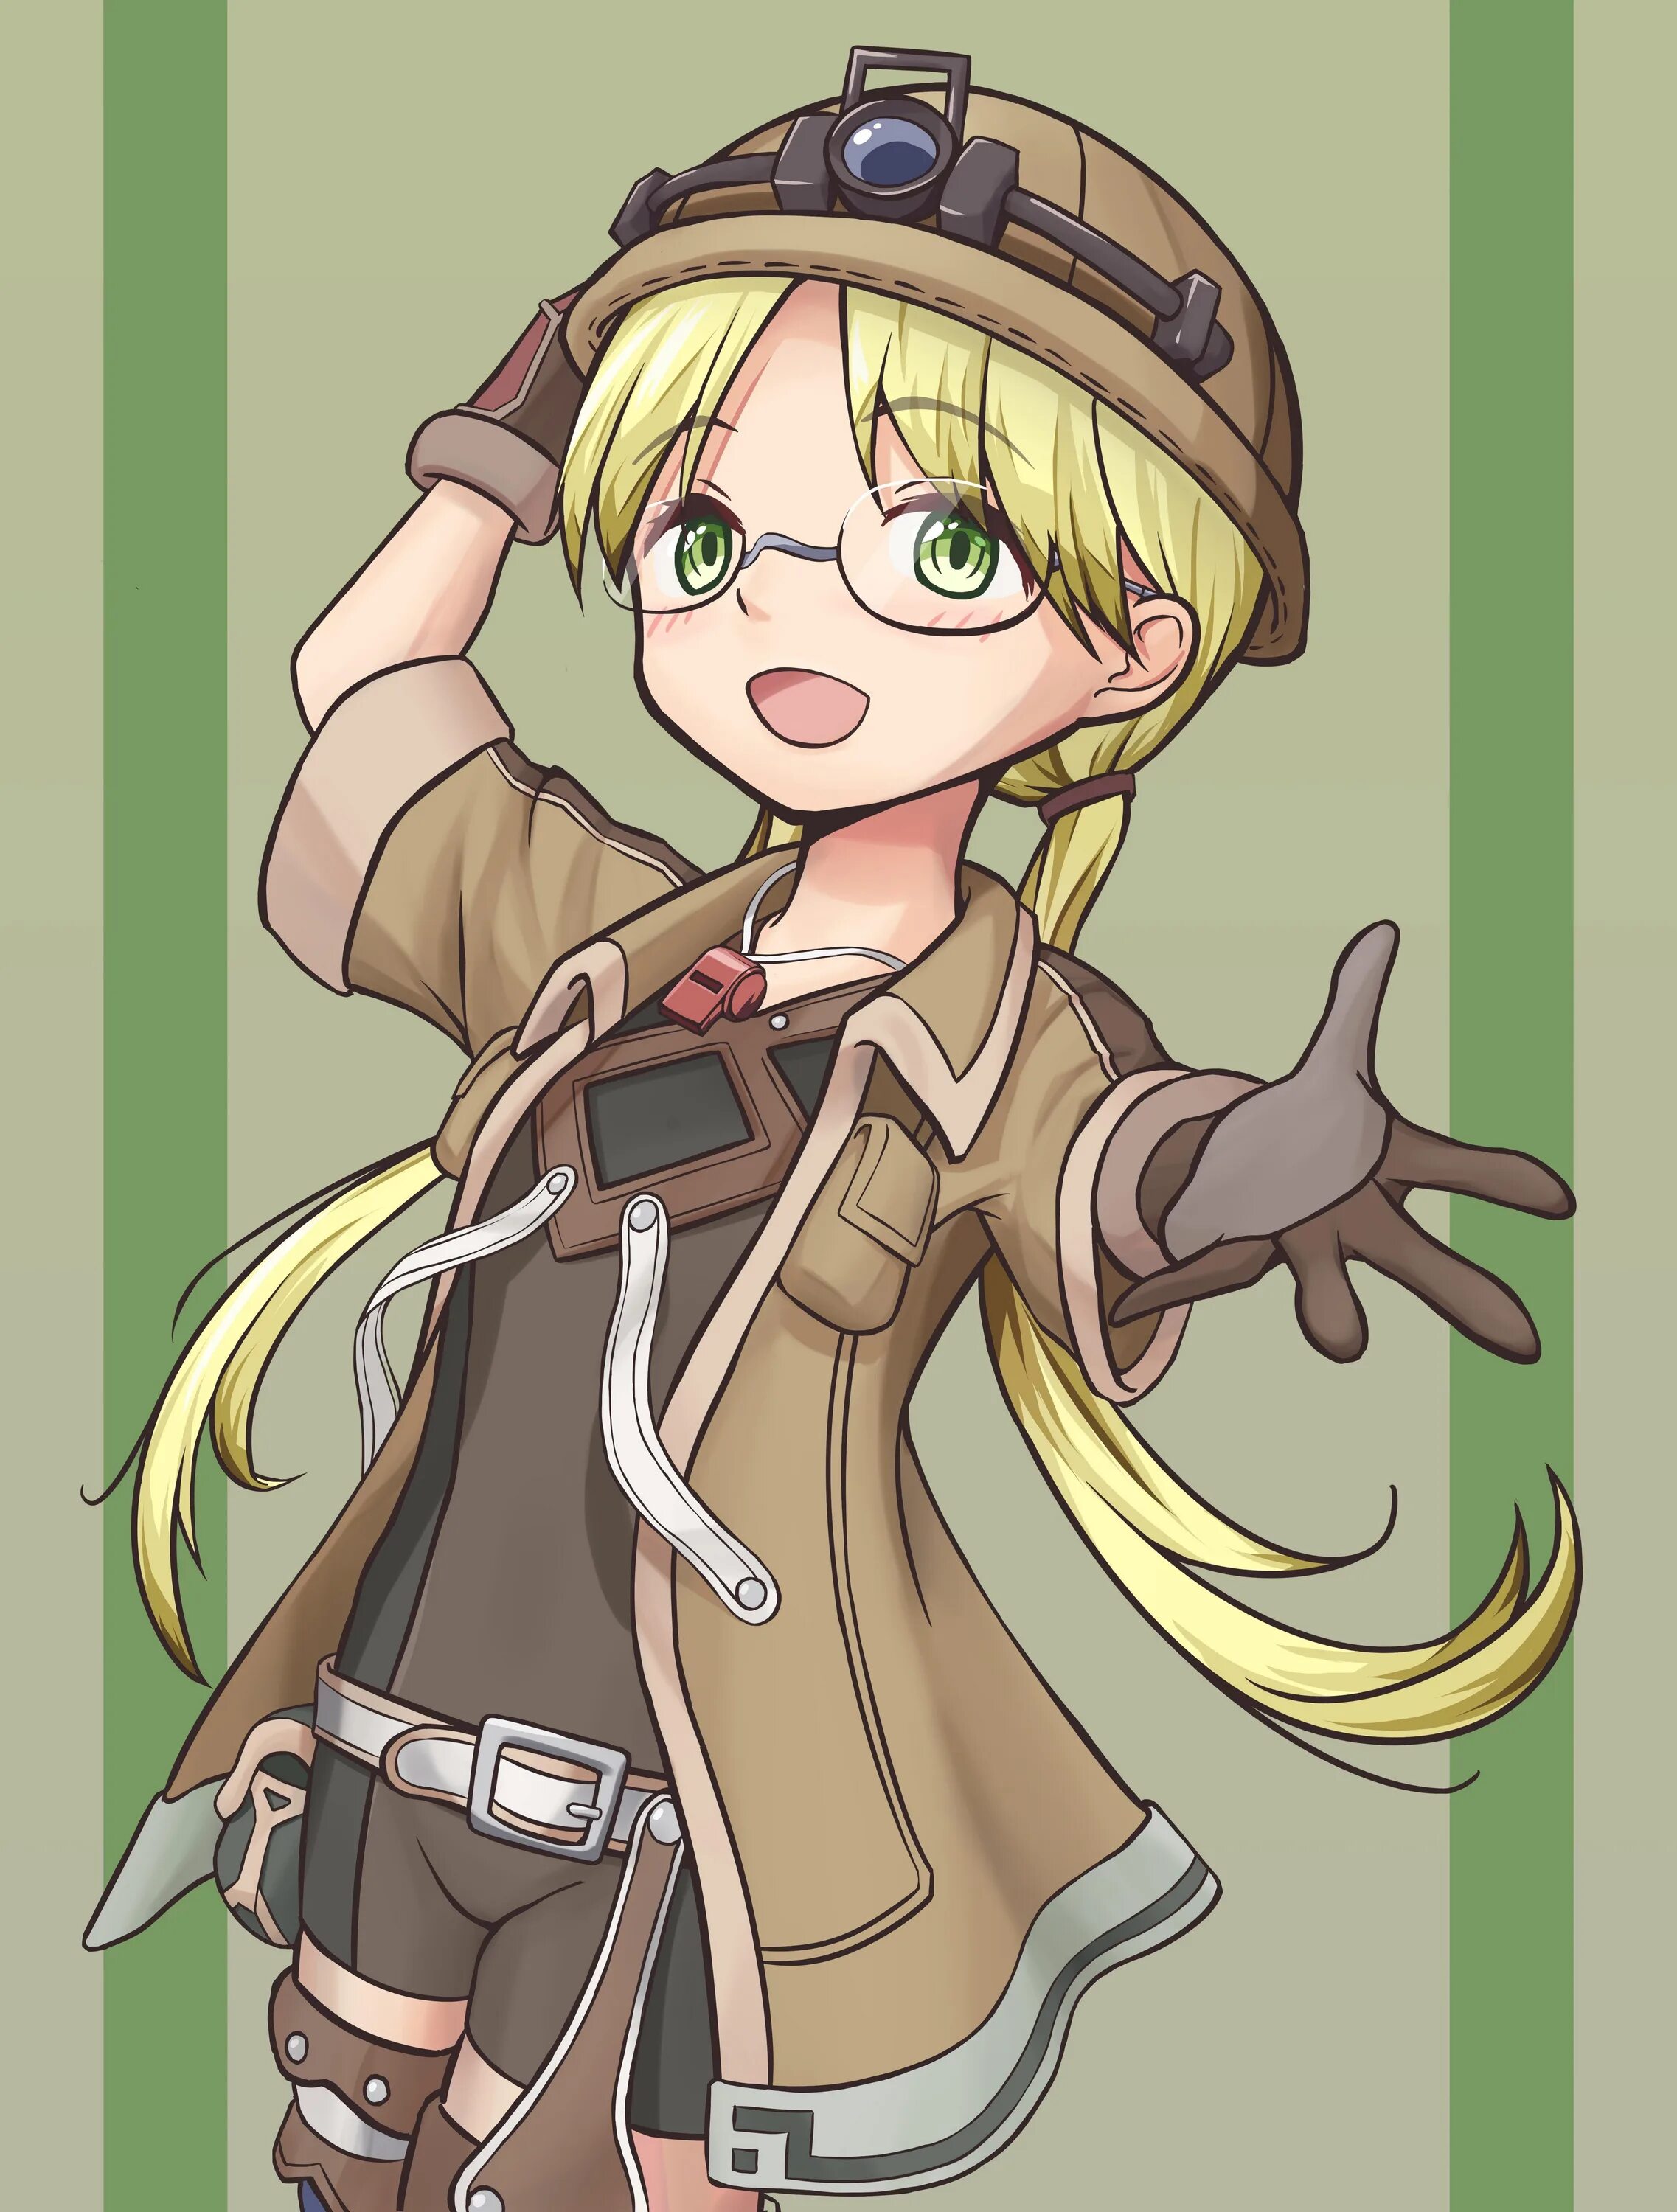 Рико made in Abyss. Рико из made in Abyss. Деланные бездне